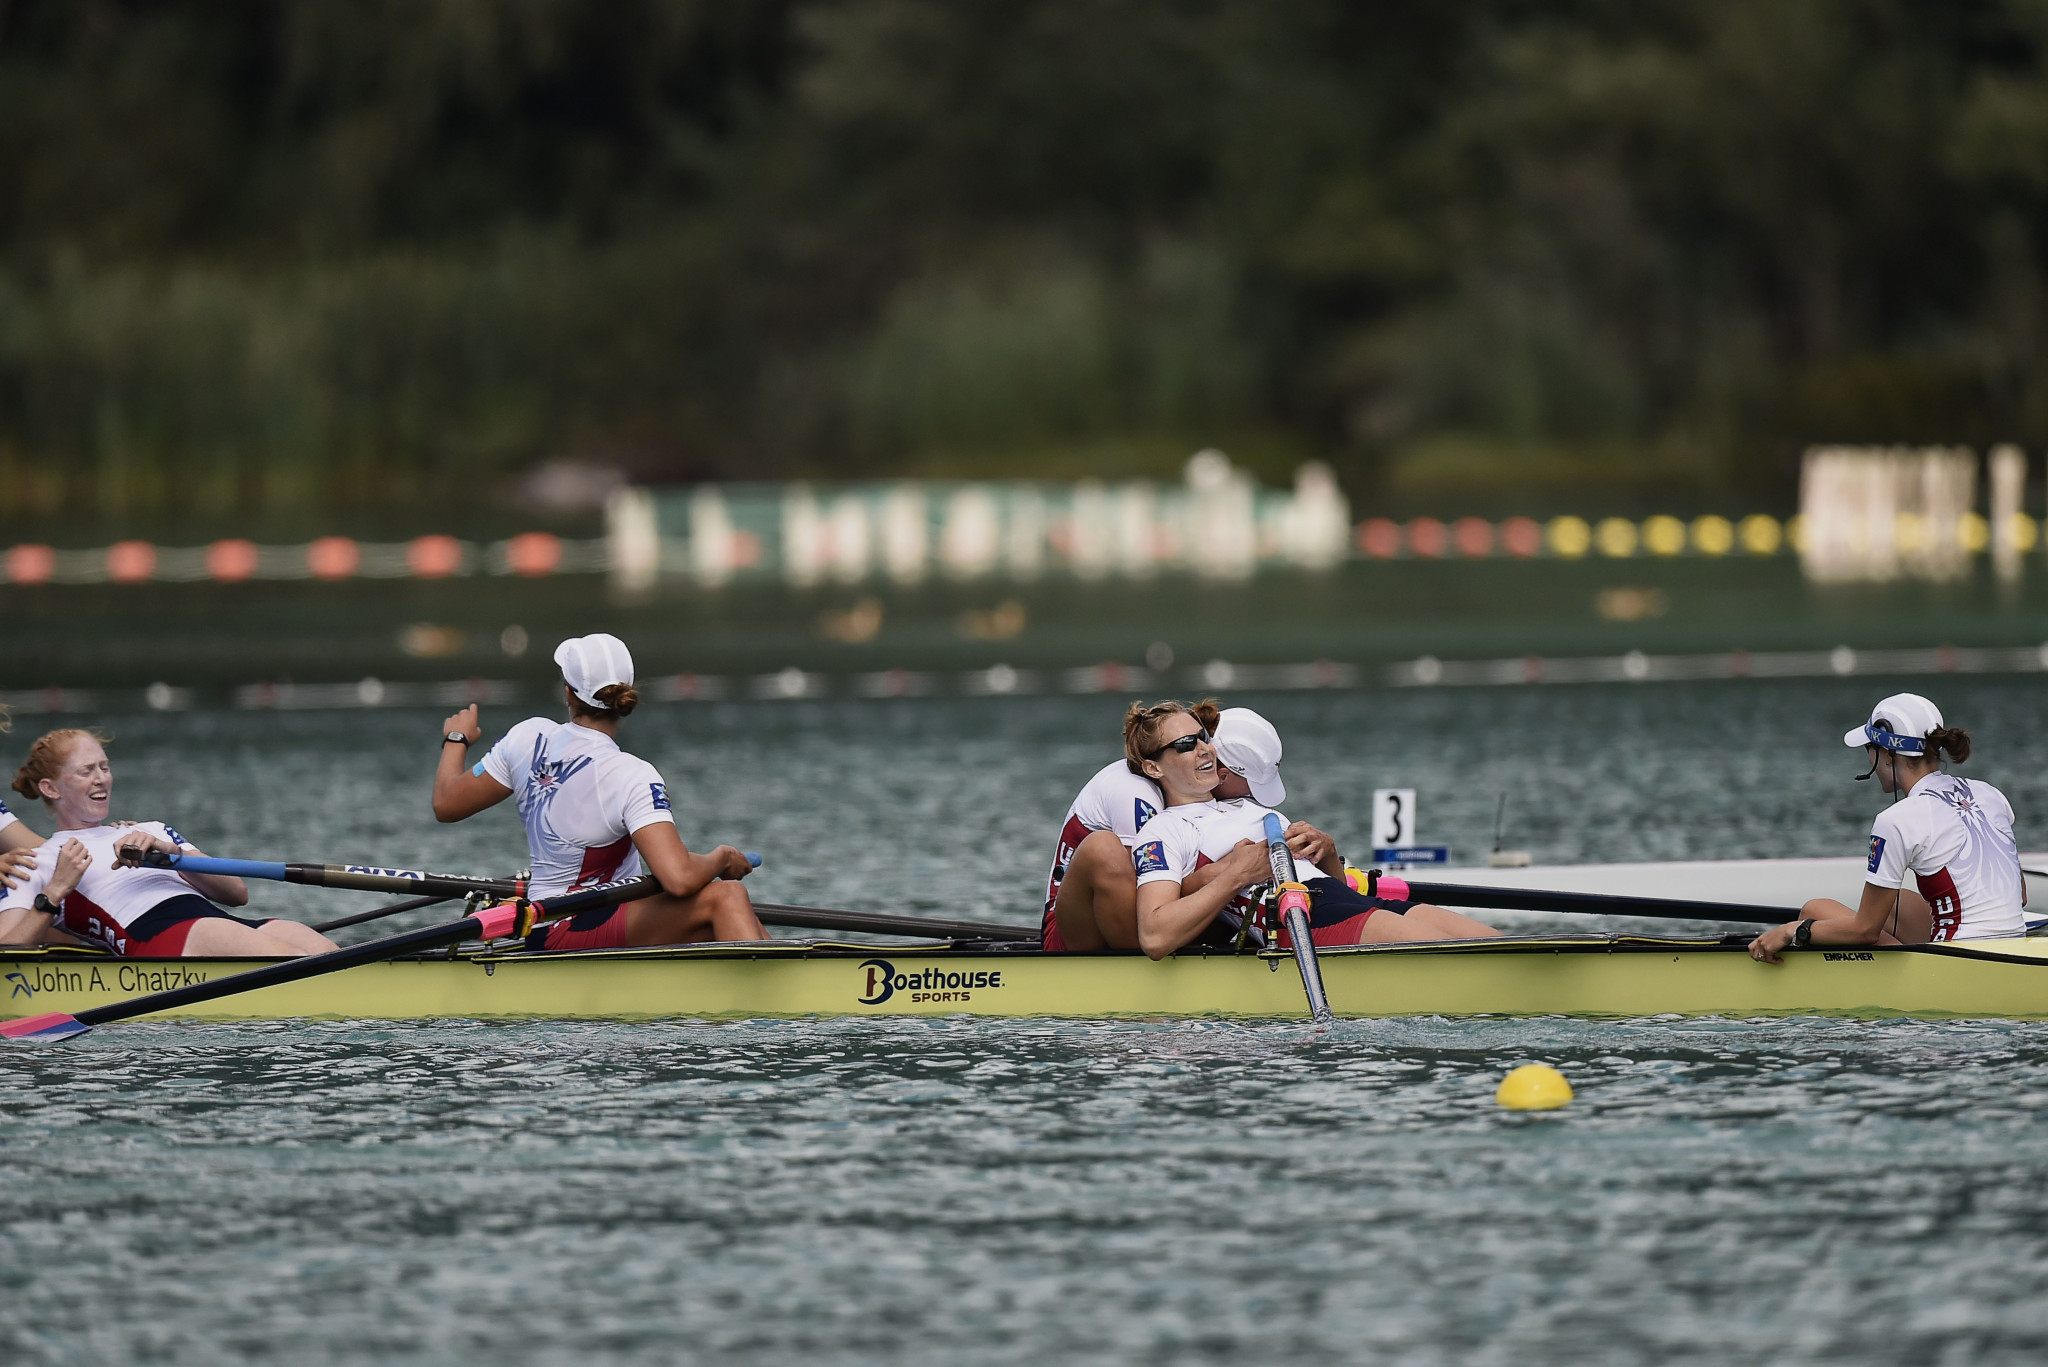 Belgrade, Poznan and Trakai in contention to host 2023 World Rowing Championships